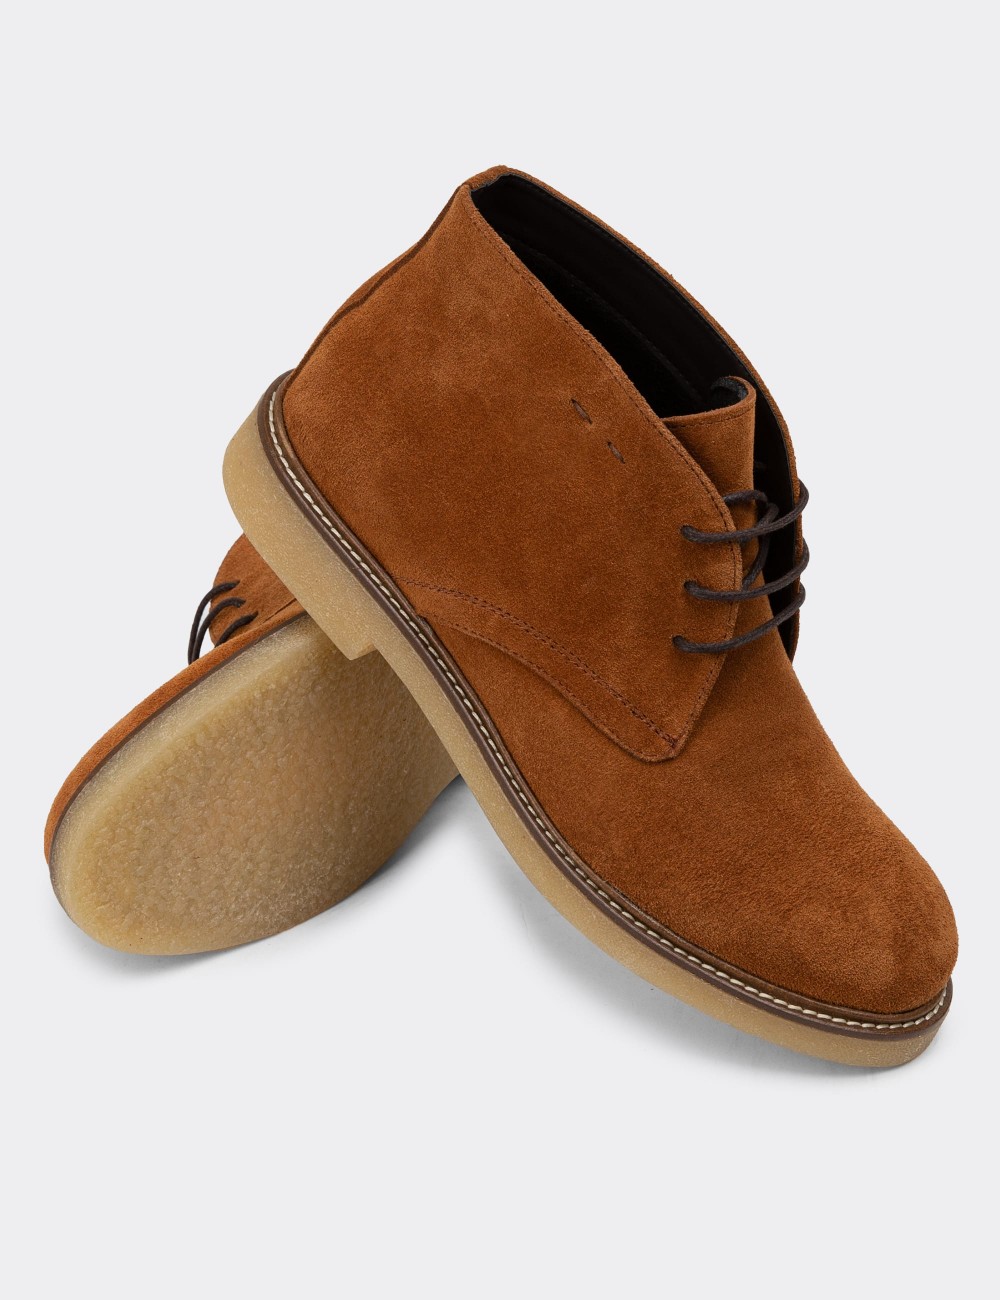 Brown Suede Leather Desert Boots - 01295MTRNC01